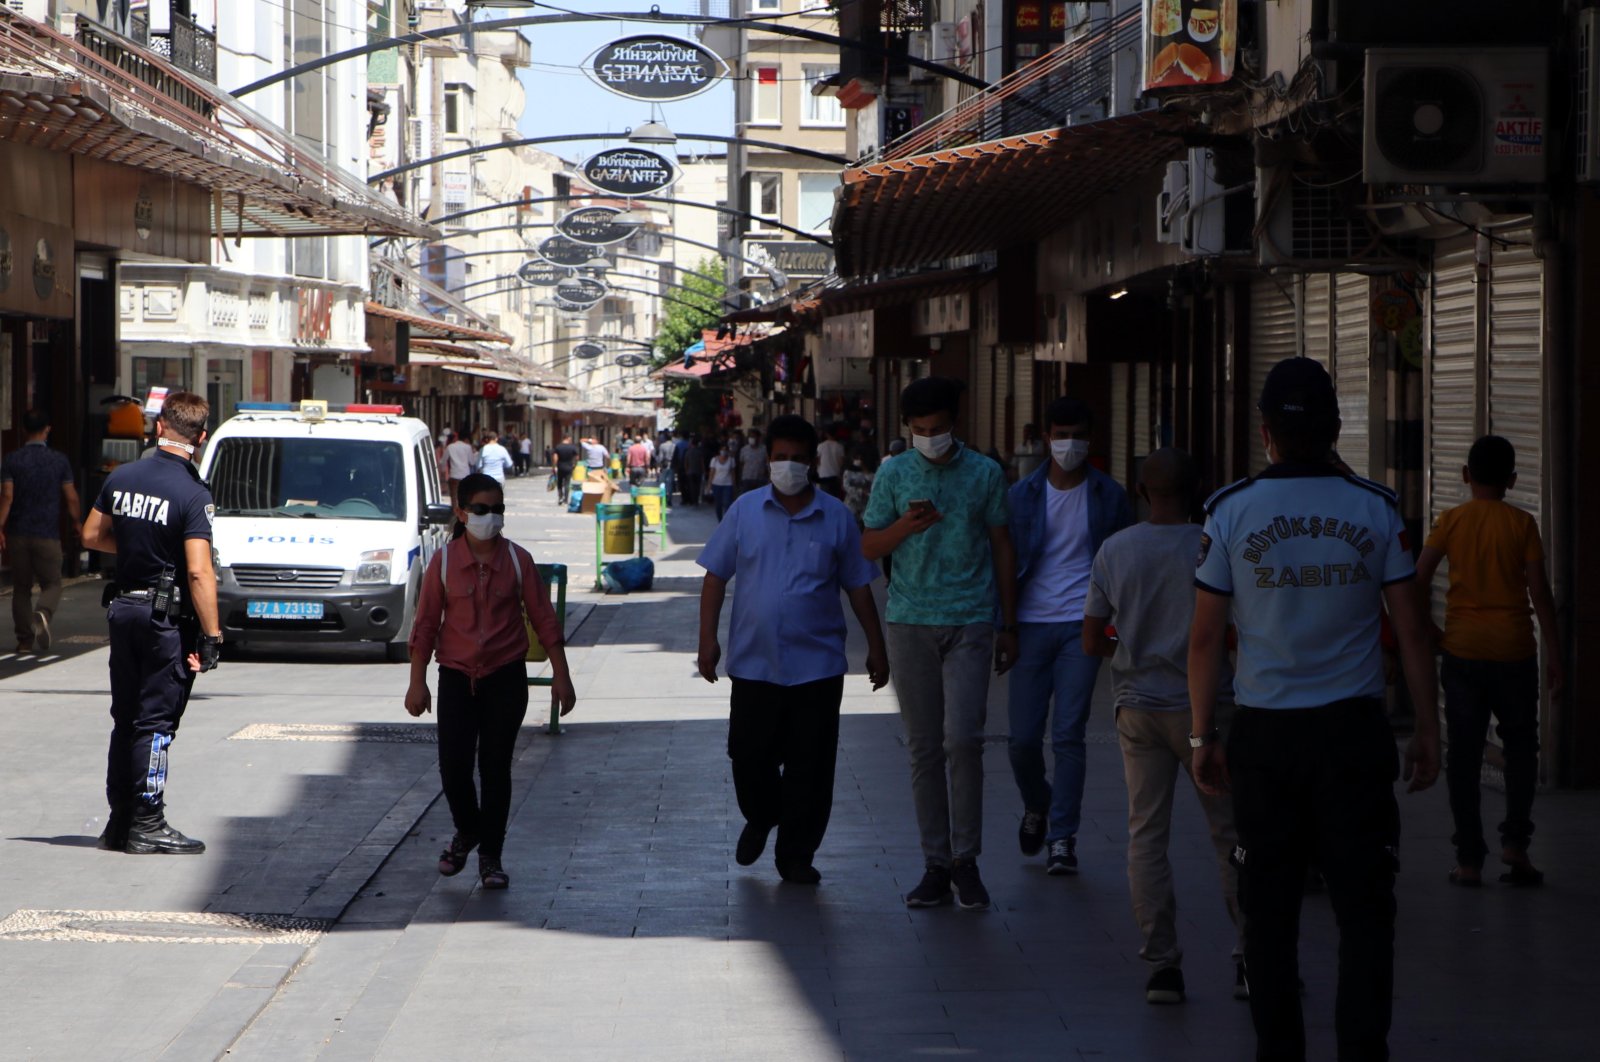 People wearing protective masks walk on a street in Gaziantep, southern Turkey, Aug. 2, 2020. (DHA Photo)